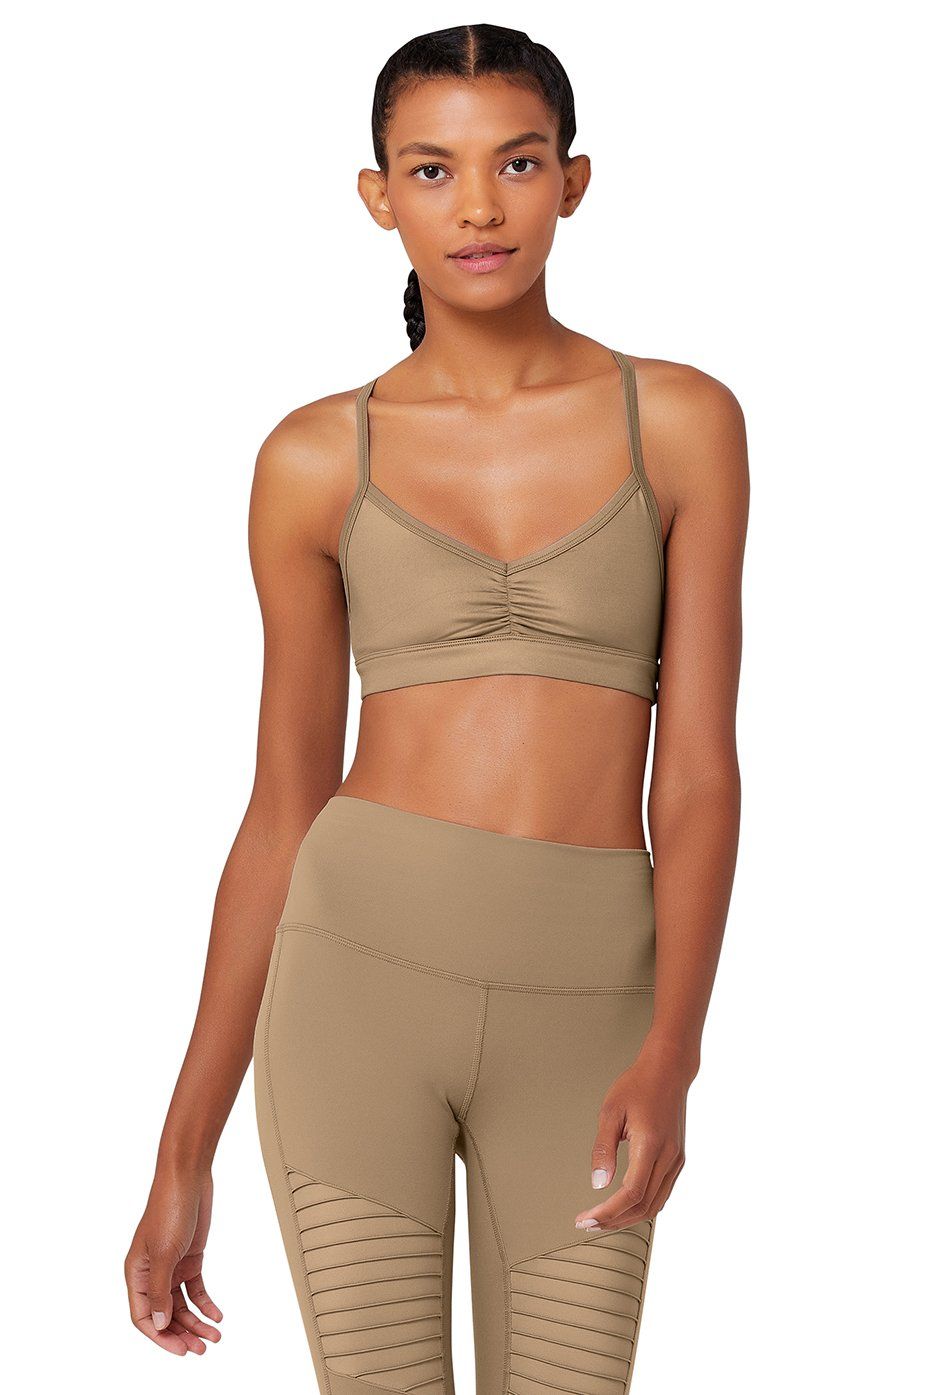 Alo Yoga Just Restocked Their Sale Section For Up To 40% Off